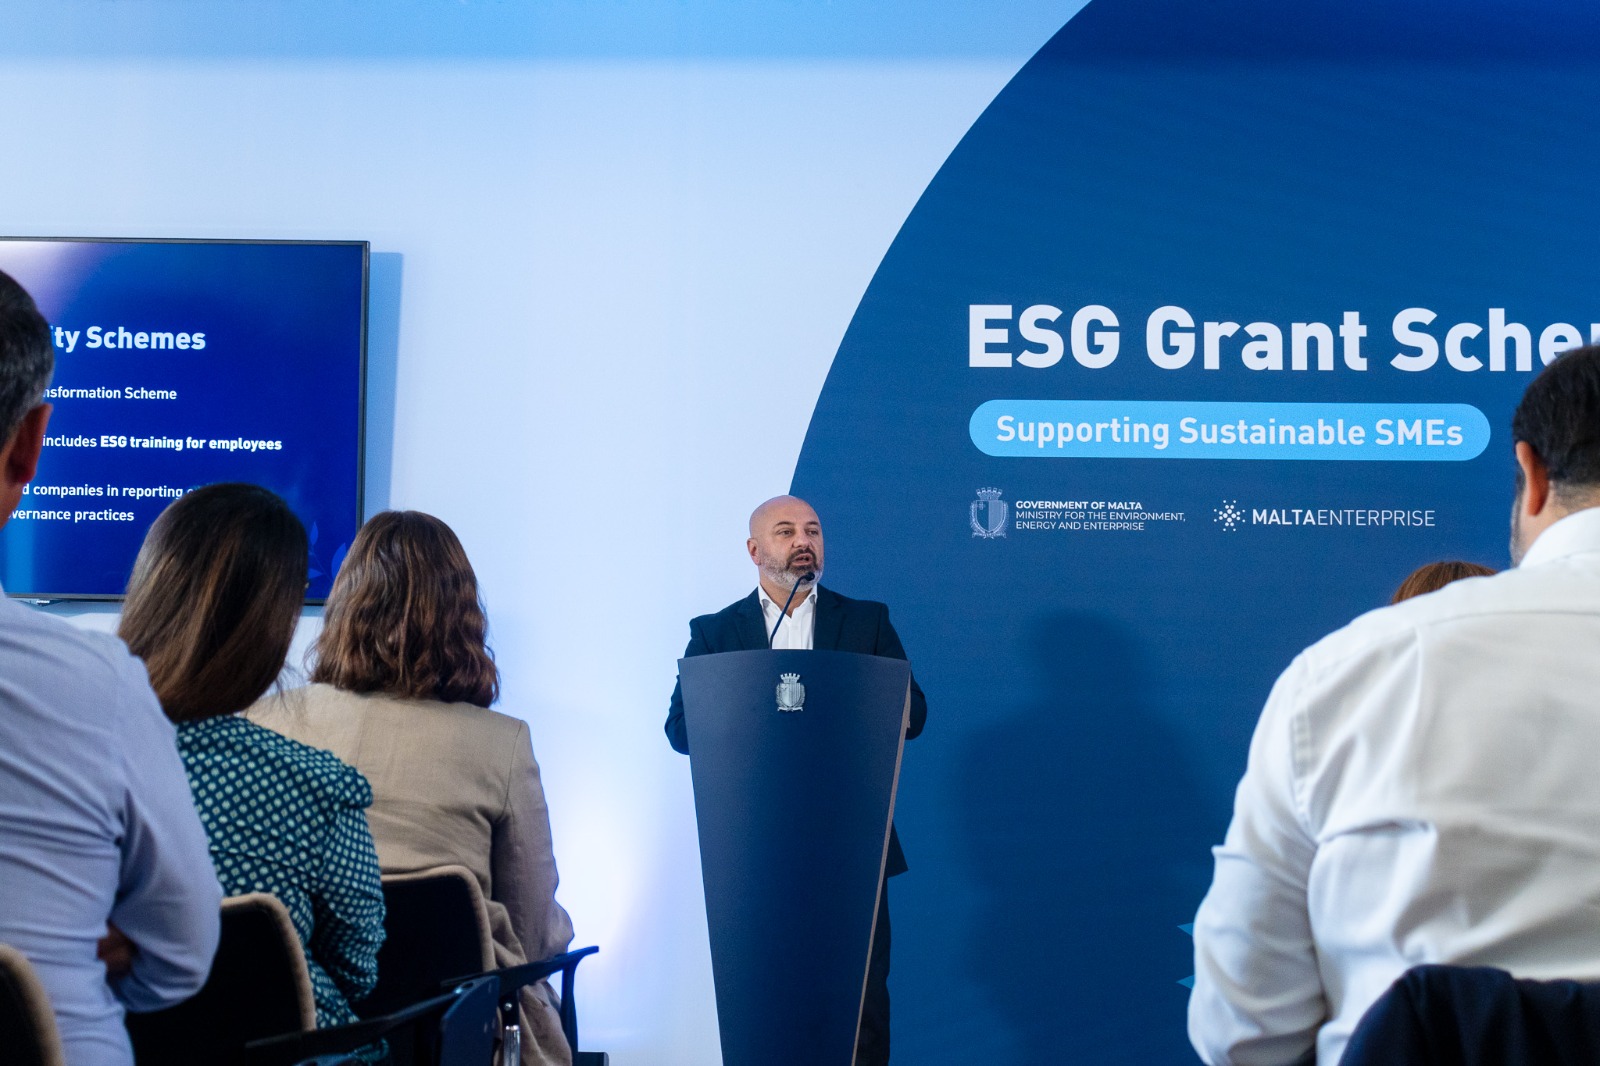 ESG Grant Scheme Announced – Up to €5,000 grant for SMEs over 3 years